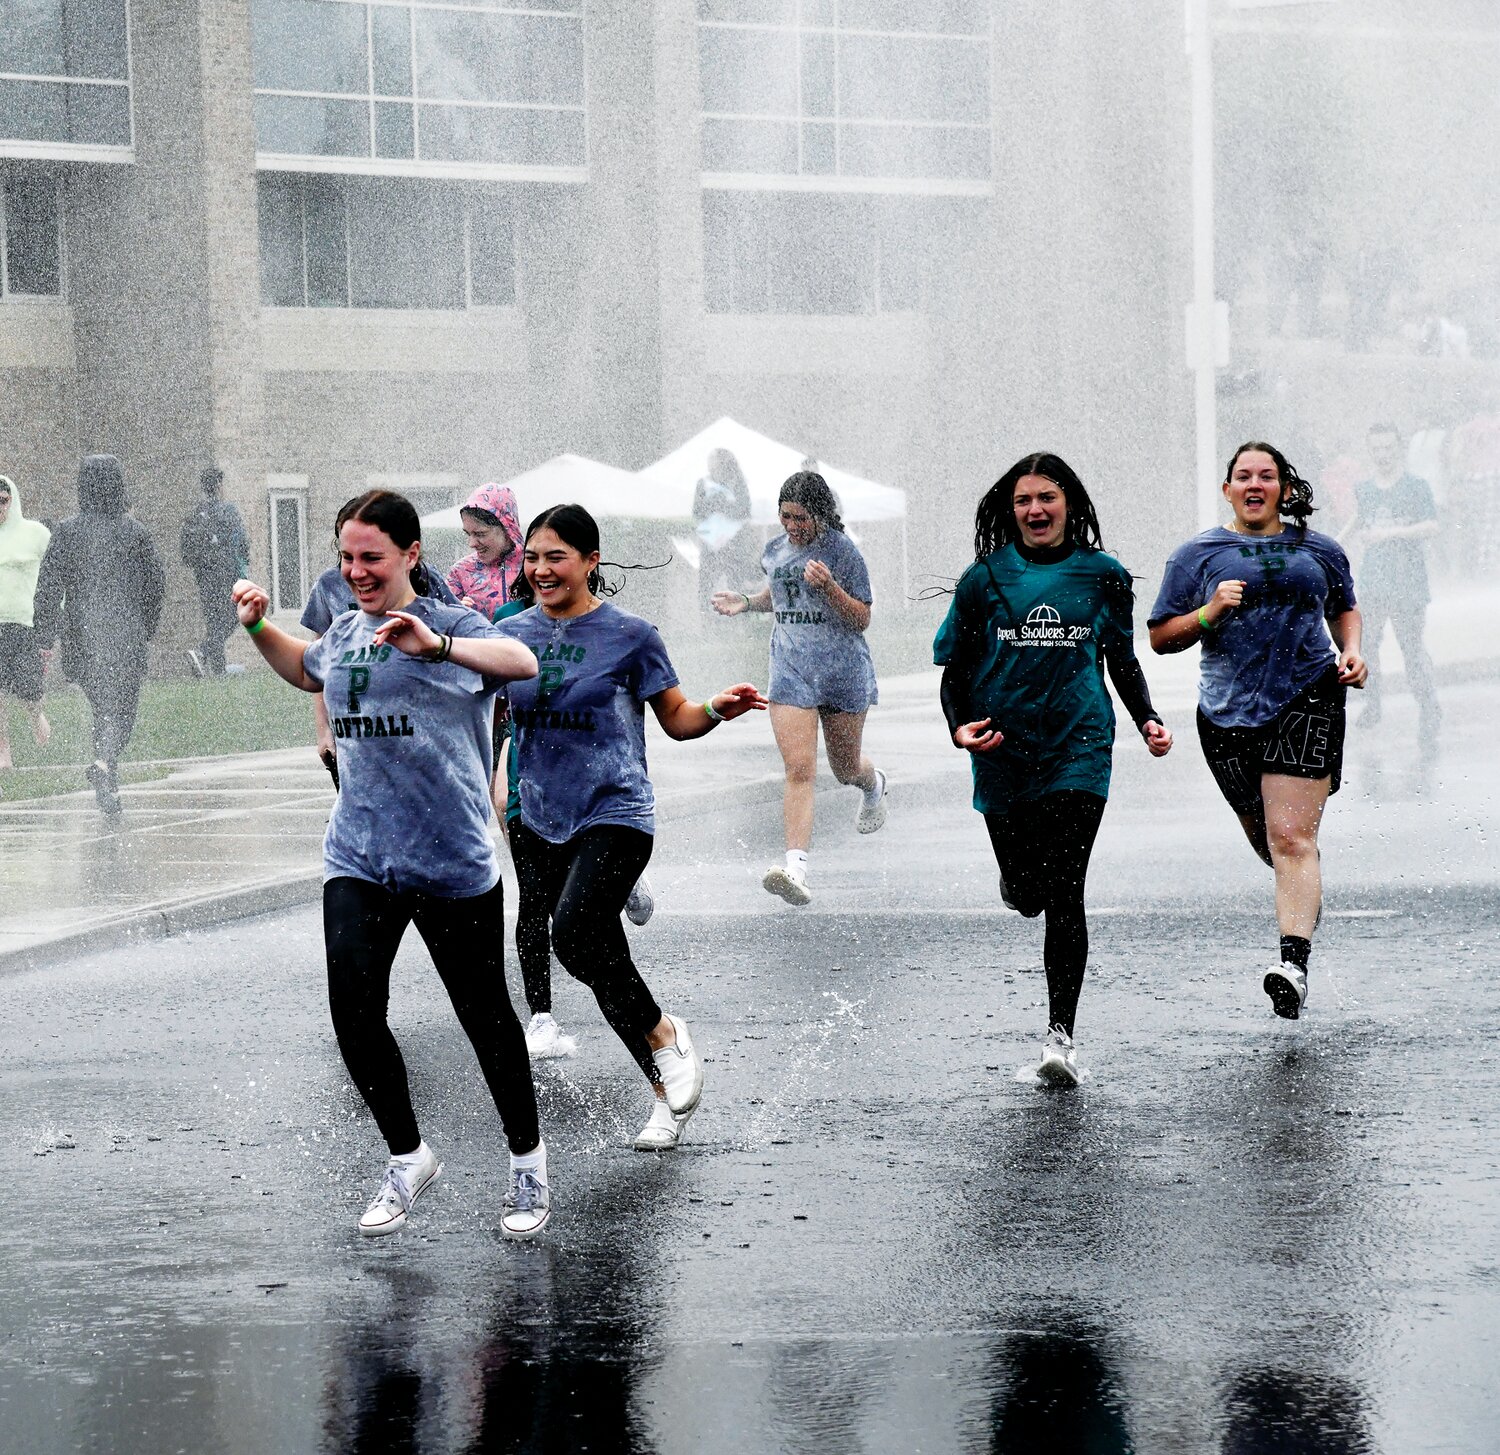 Students race through a deluge of water.